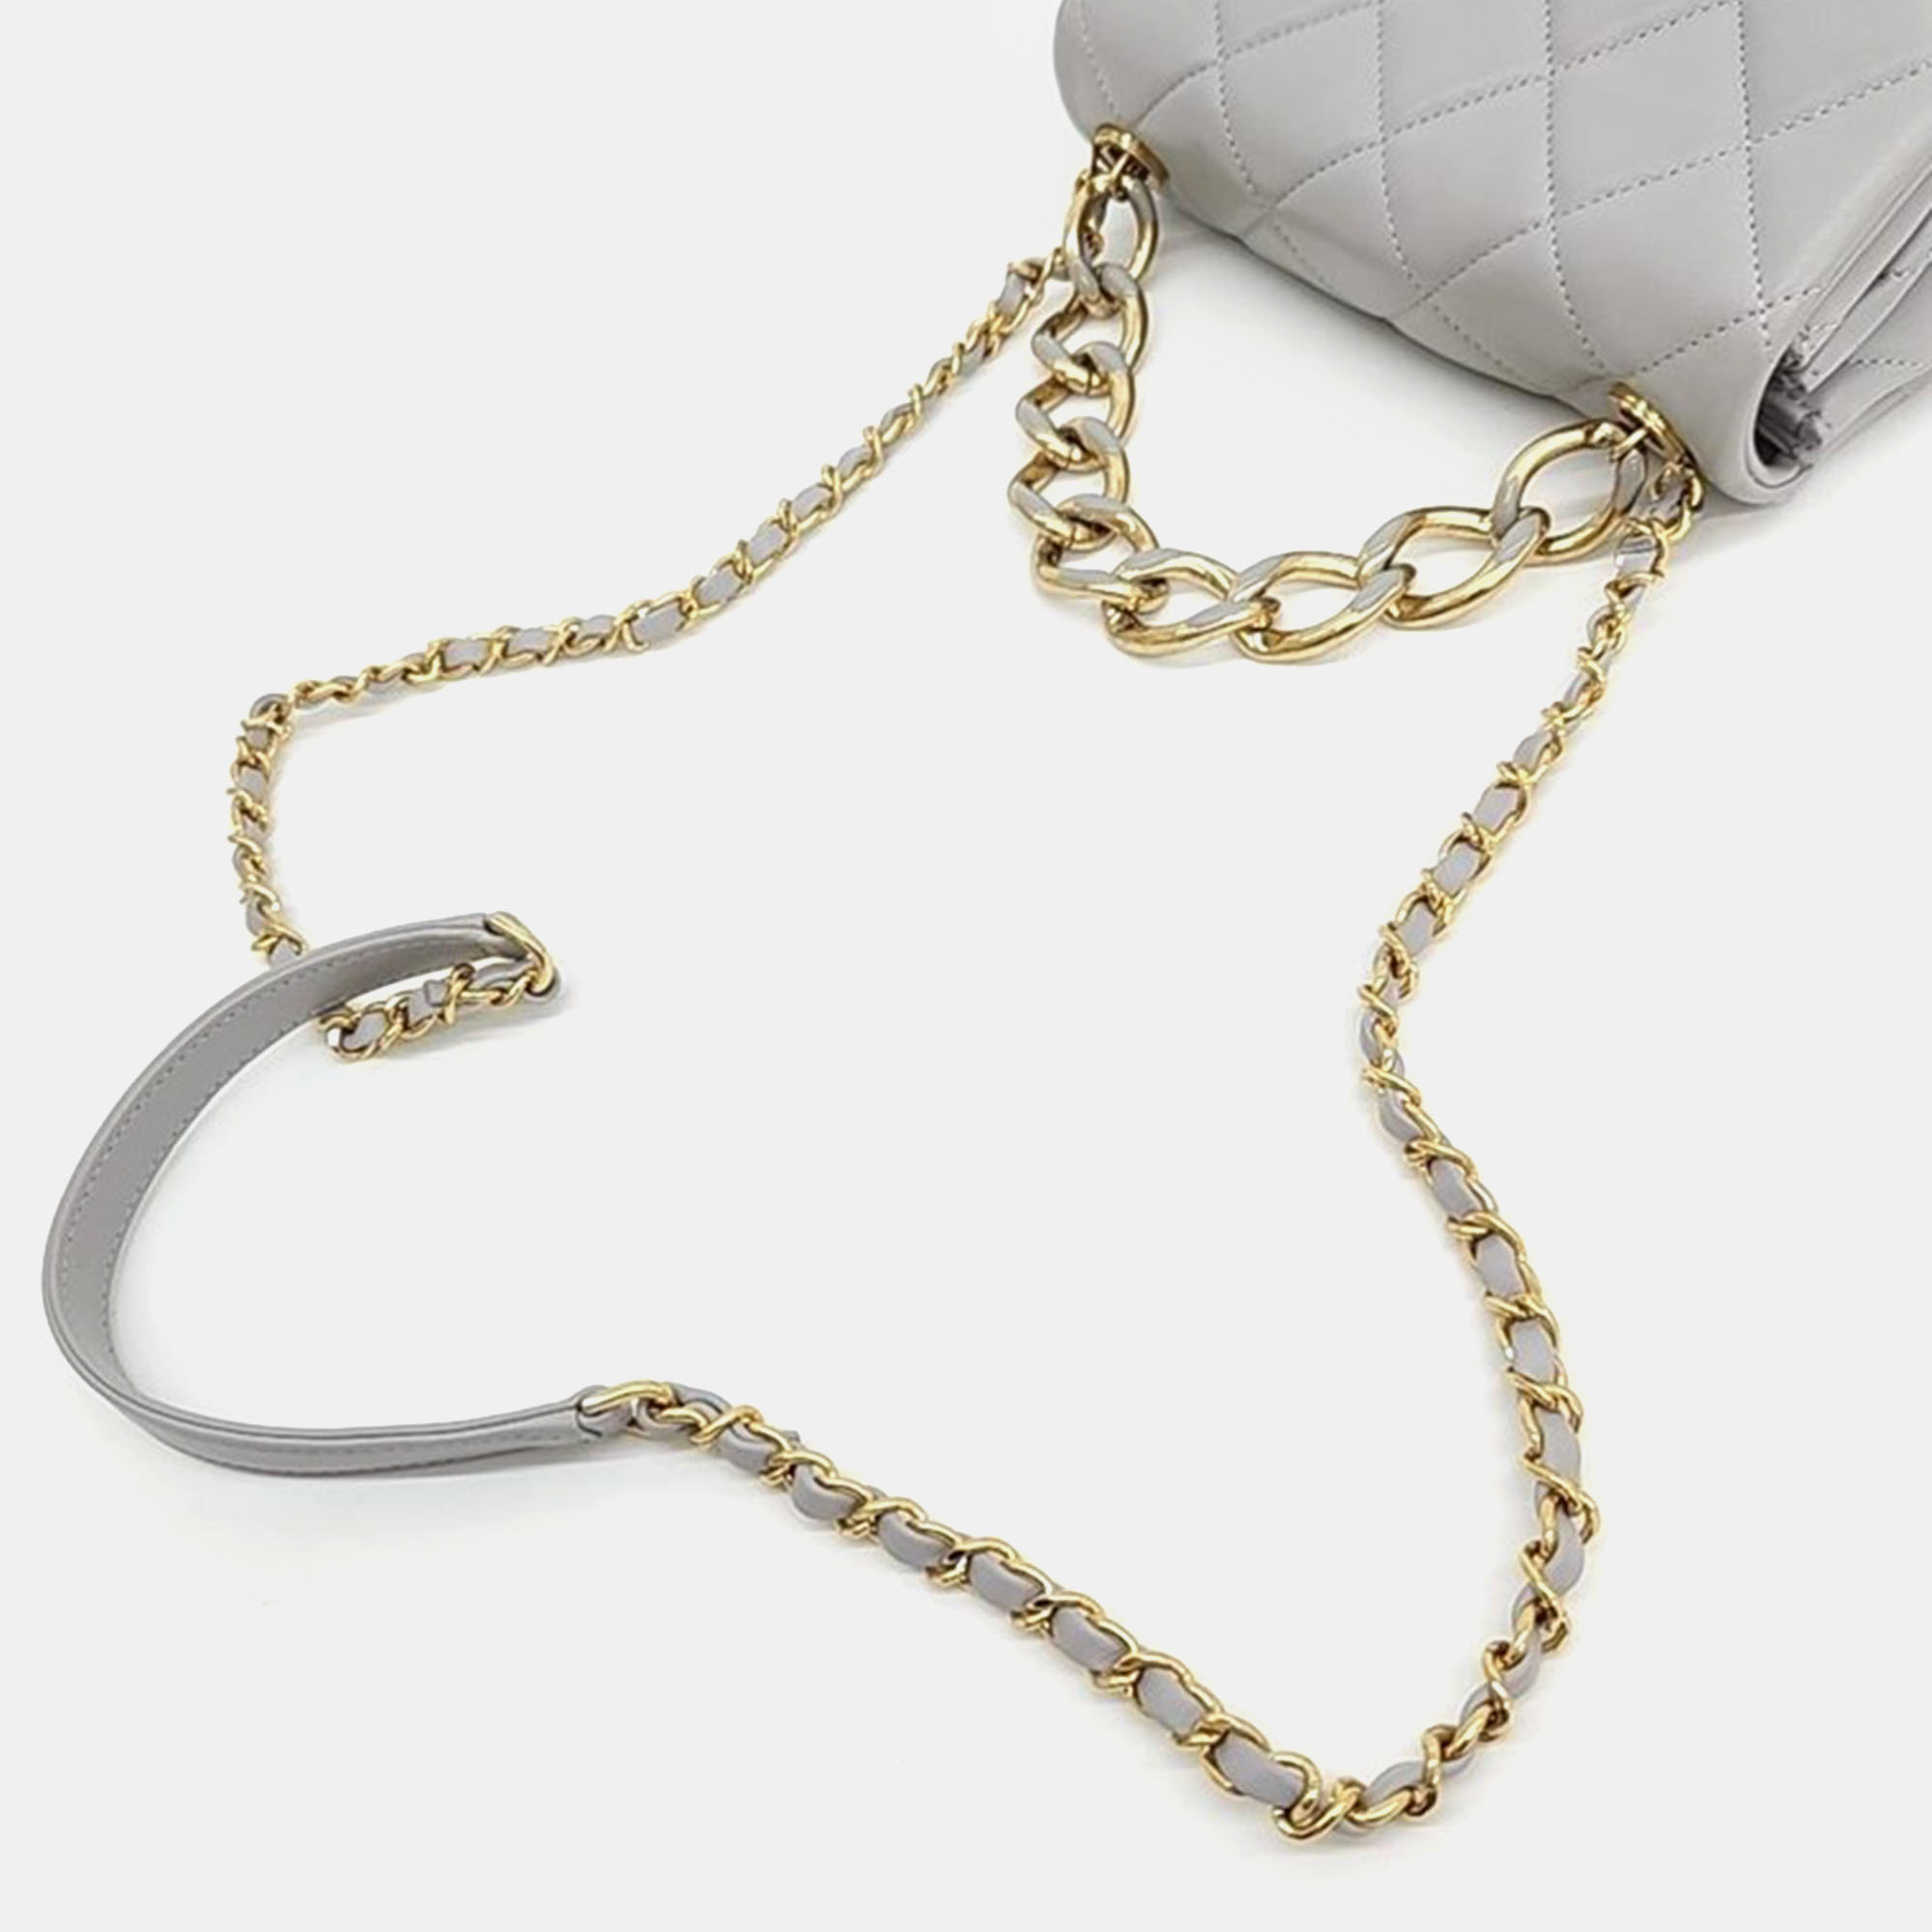 Chanel Flap Chain Tote And Shoulder Bag